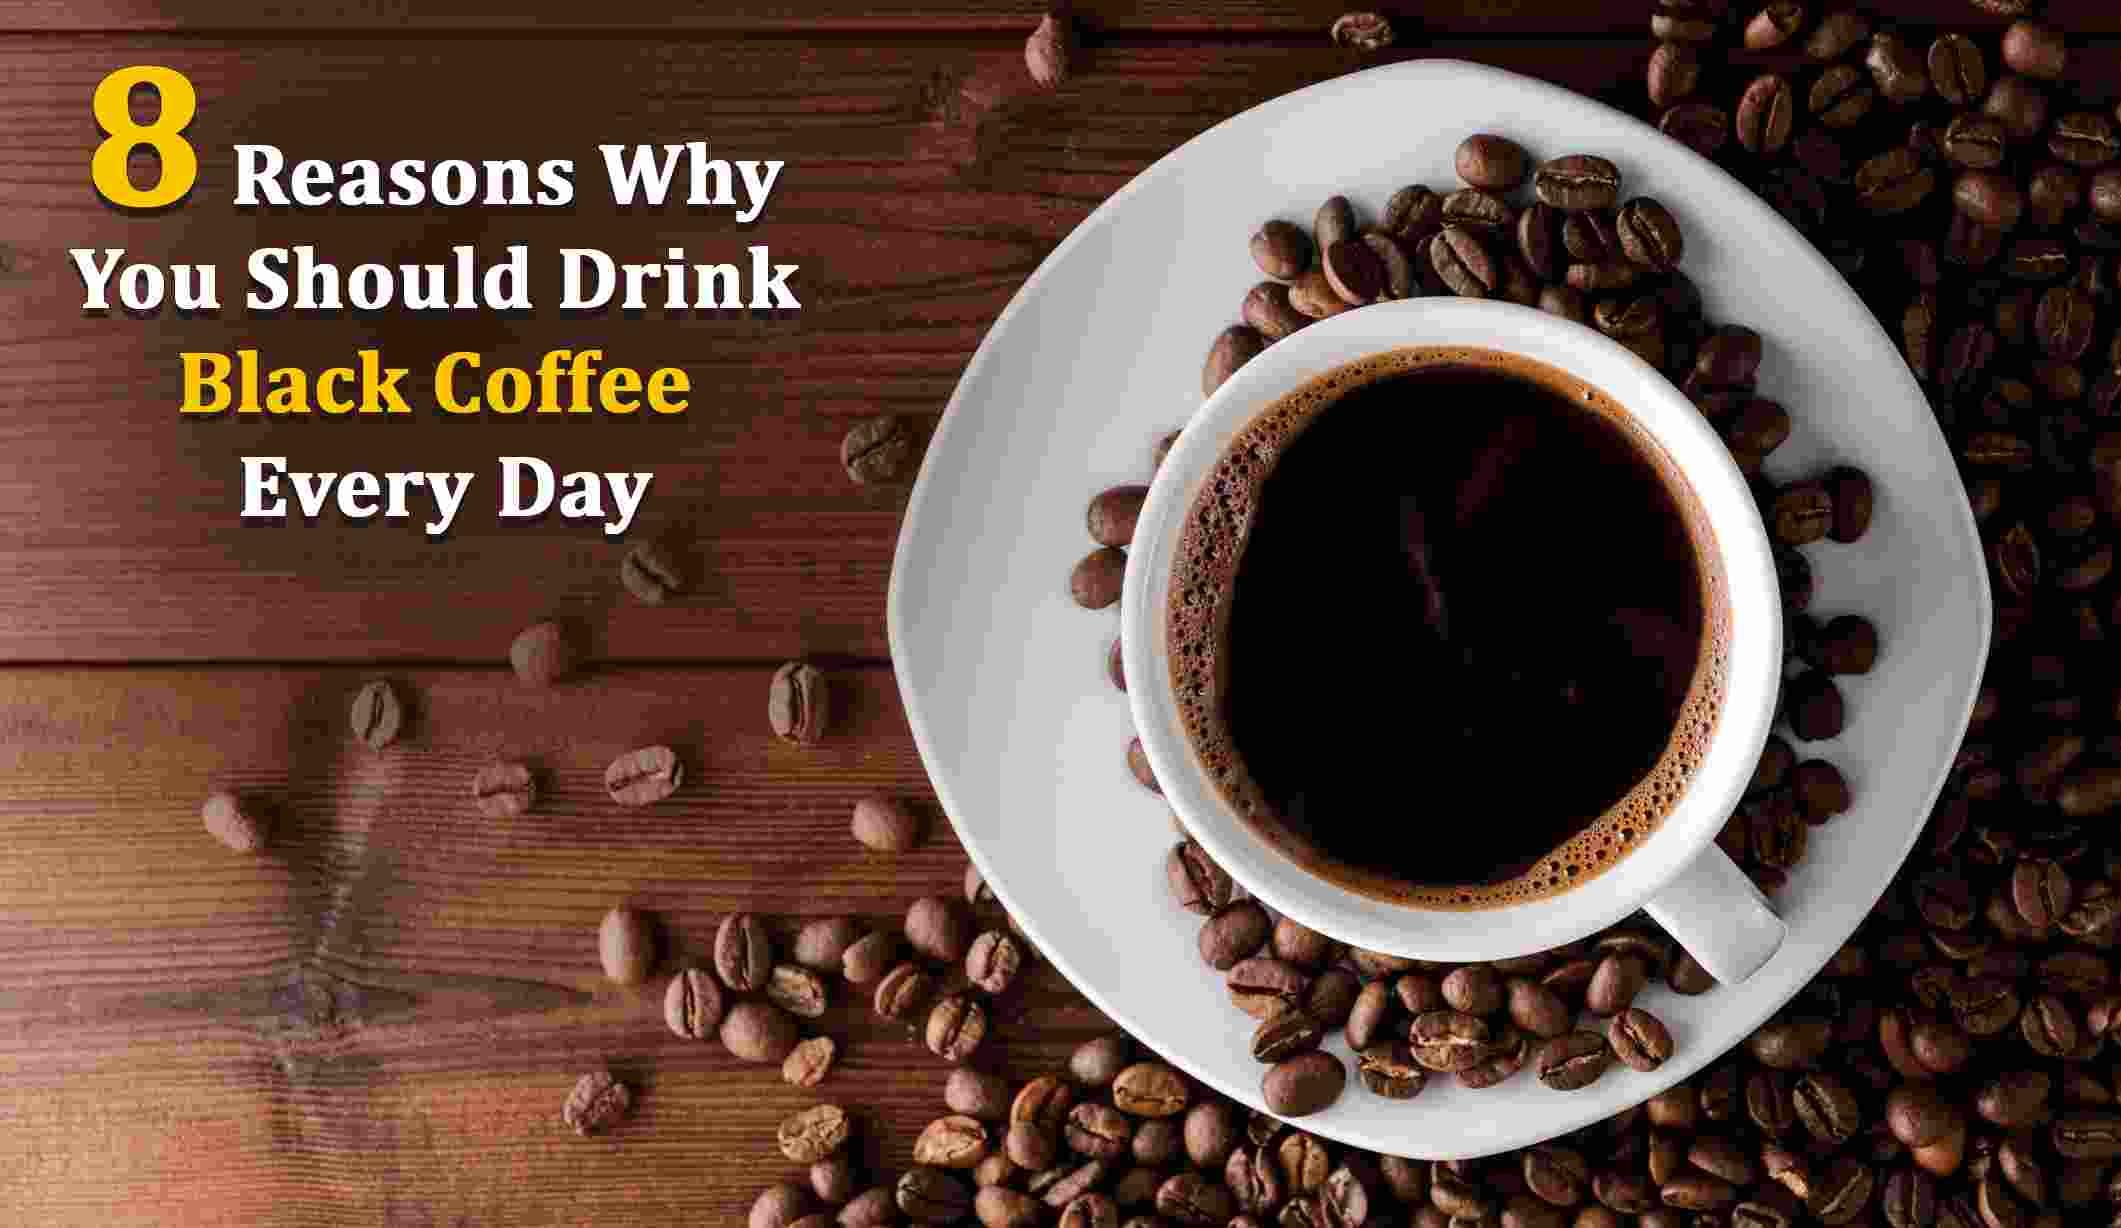 8 Reasons Why You Should Drink Black Coffee Every Day